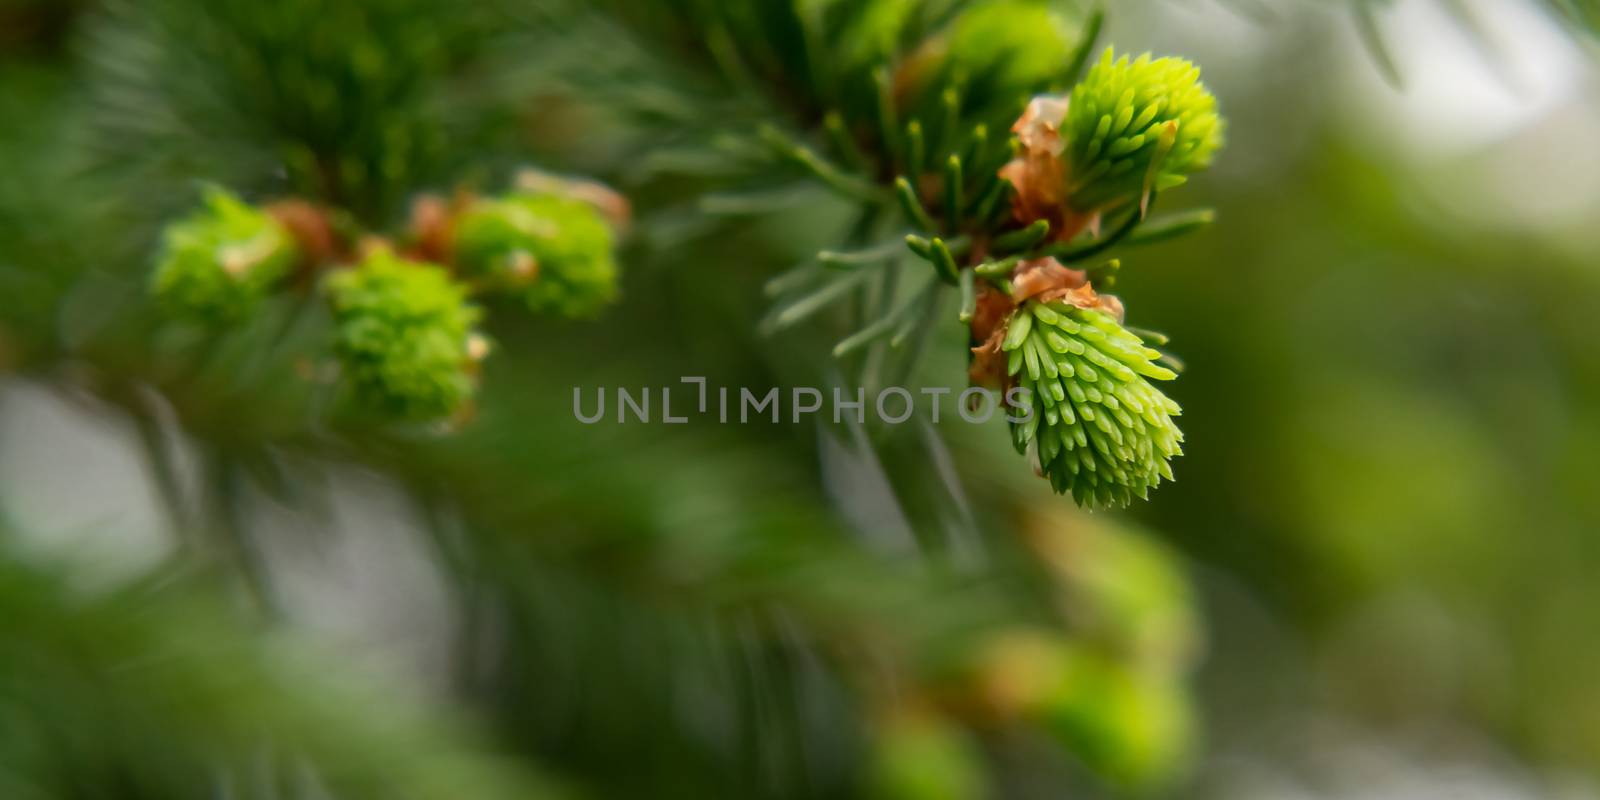 Sprig of spruce with fresh spring growth of needles - a beautiful green natural background.